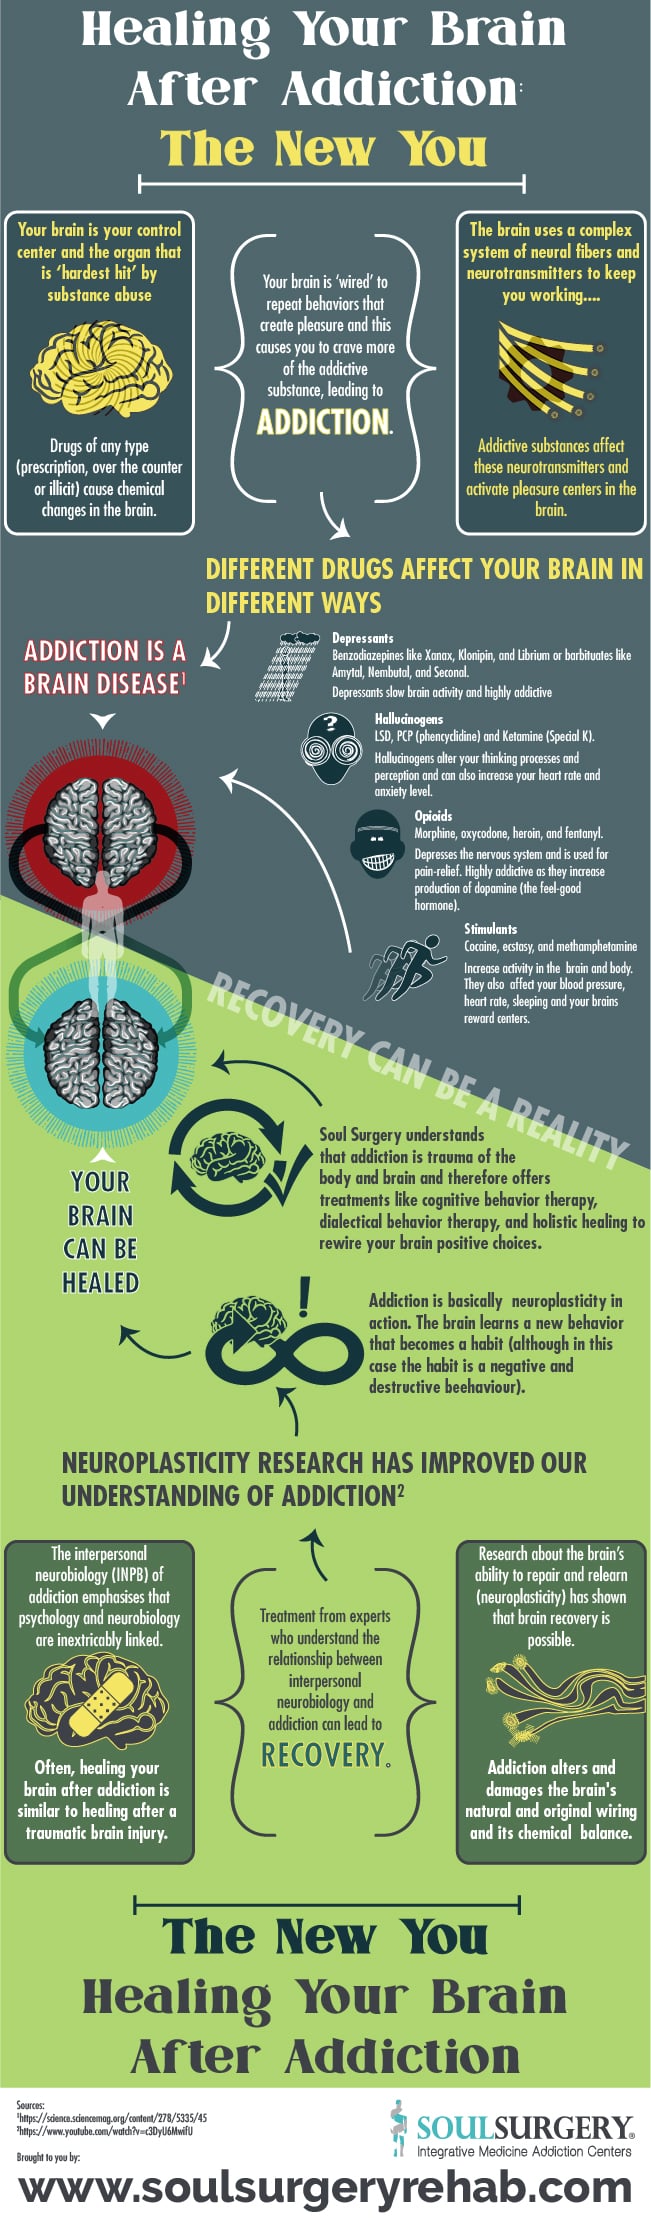 Healing Your Brain After Addiction: The New You 